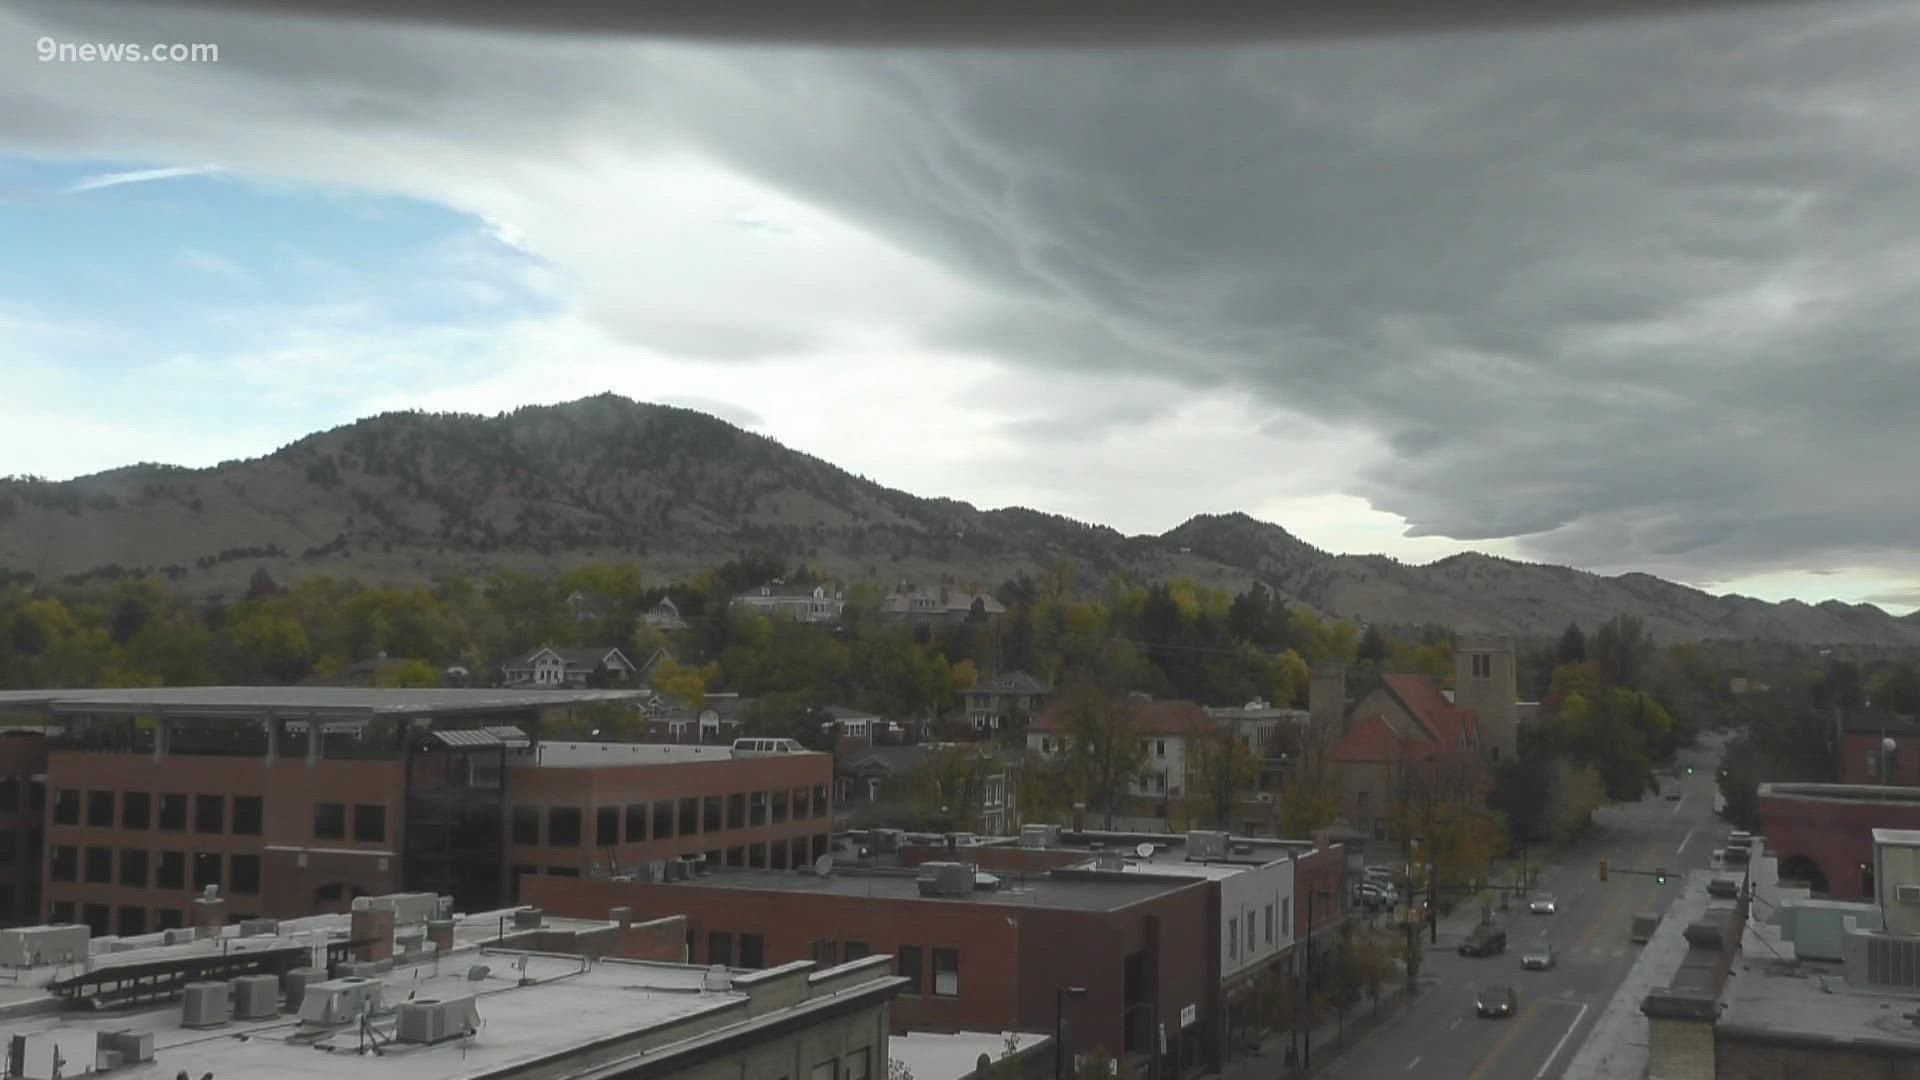 Back here in Denver we have been dealing with a stubborn "wave cloud" over the city & most of the front range today.